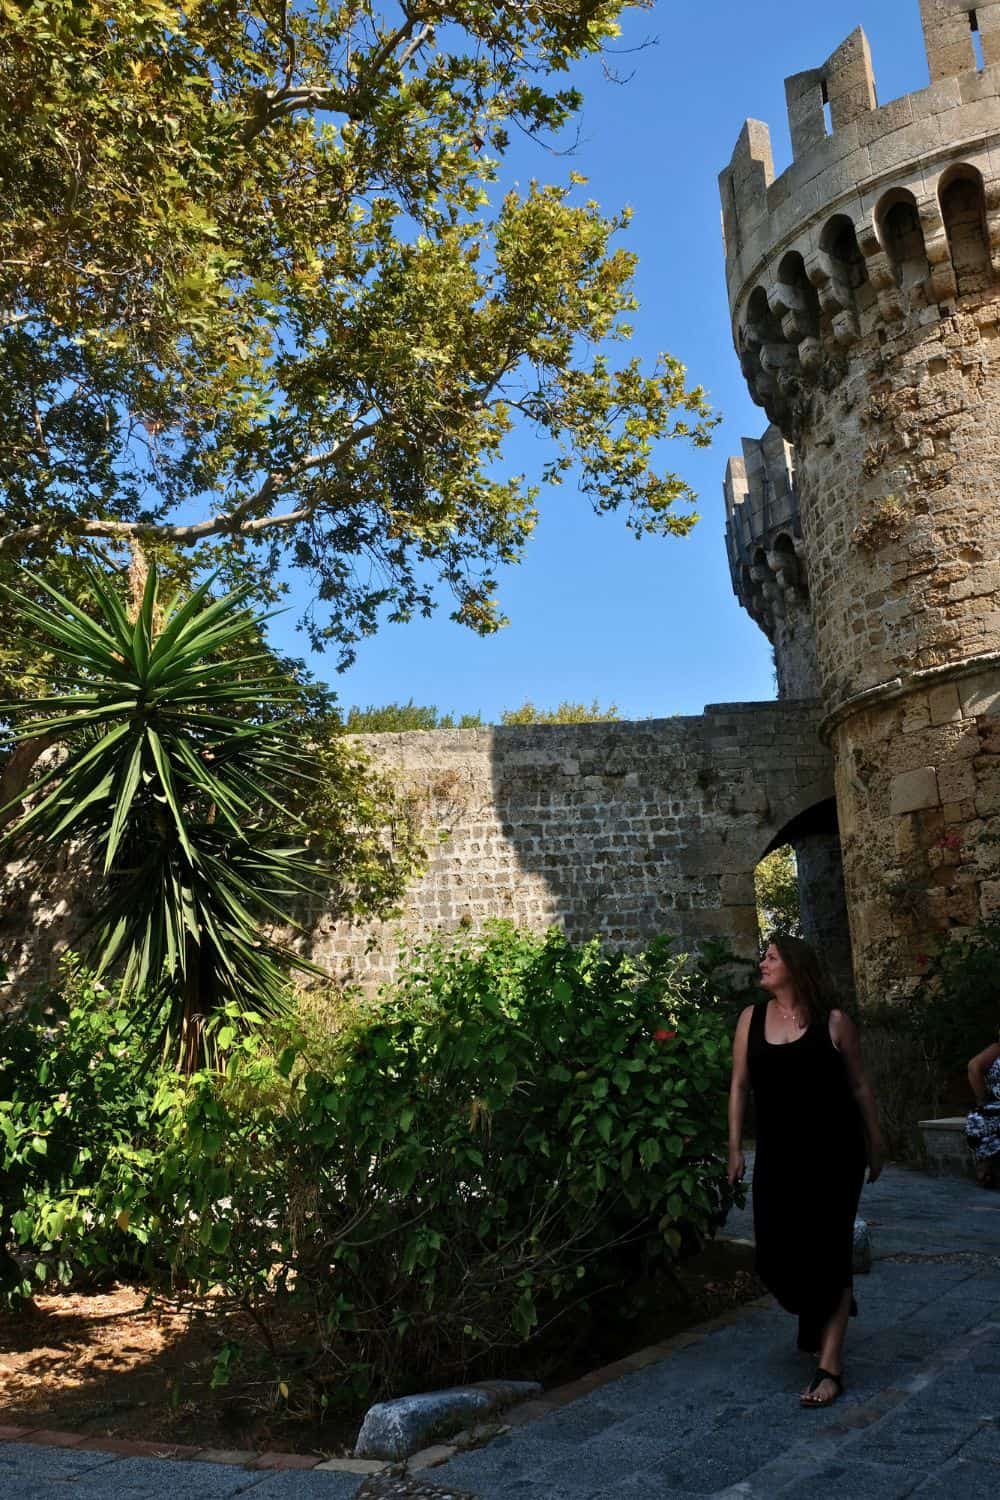 A woman walking along in Rhodes with the old city walls in the backgrond.